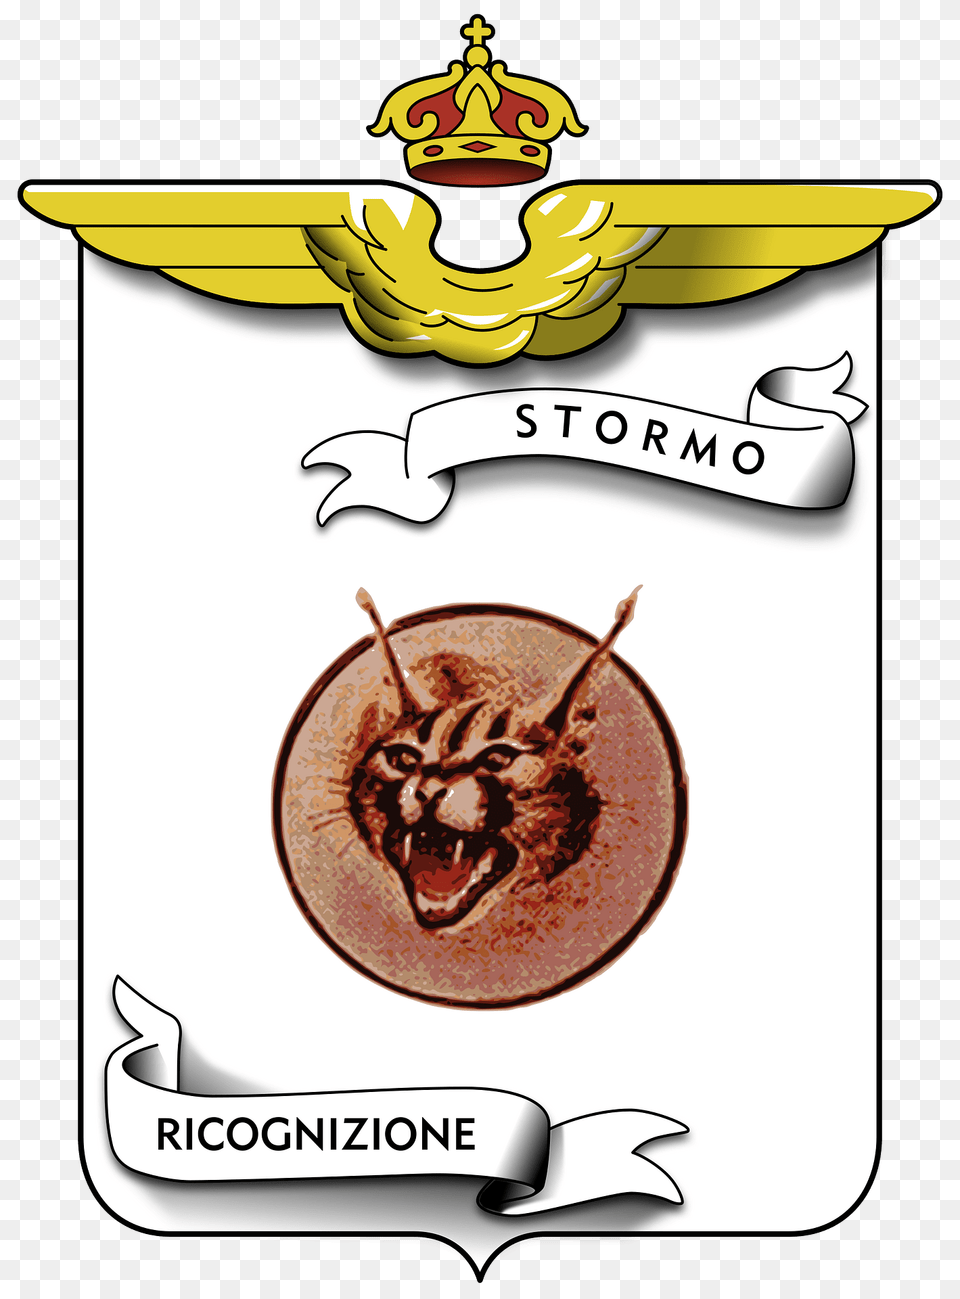 Ensign Of The 19 Stormo Of The Italian Air Force Clipart, Logo Free Transparent Png